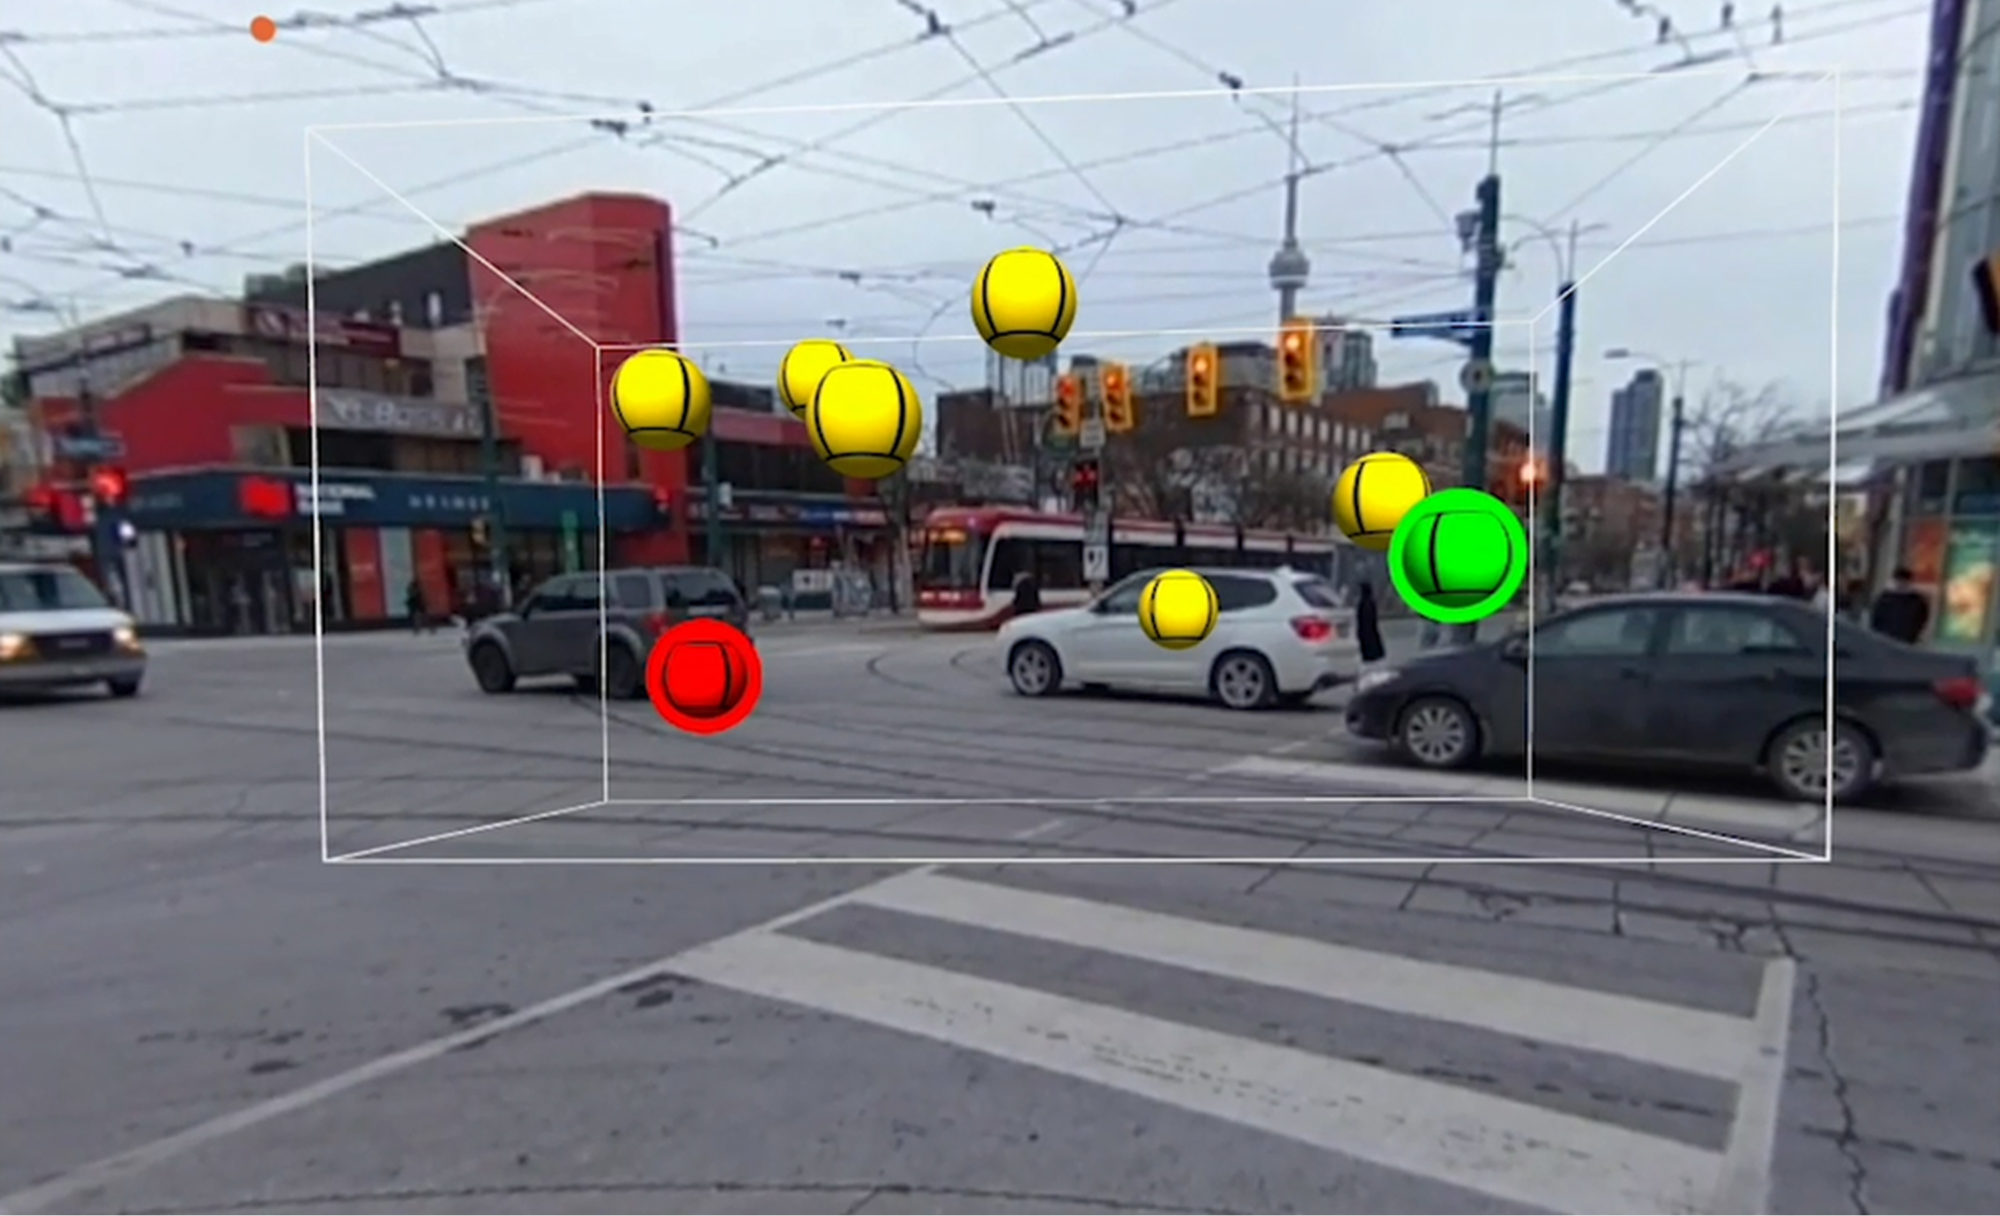 Virtual reality headset image of Toronto with digital square and yellow and green balls in the centre.